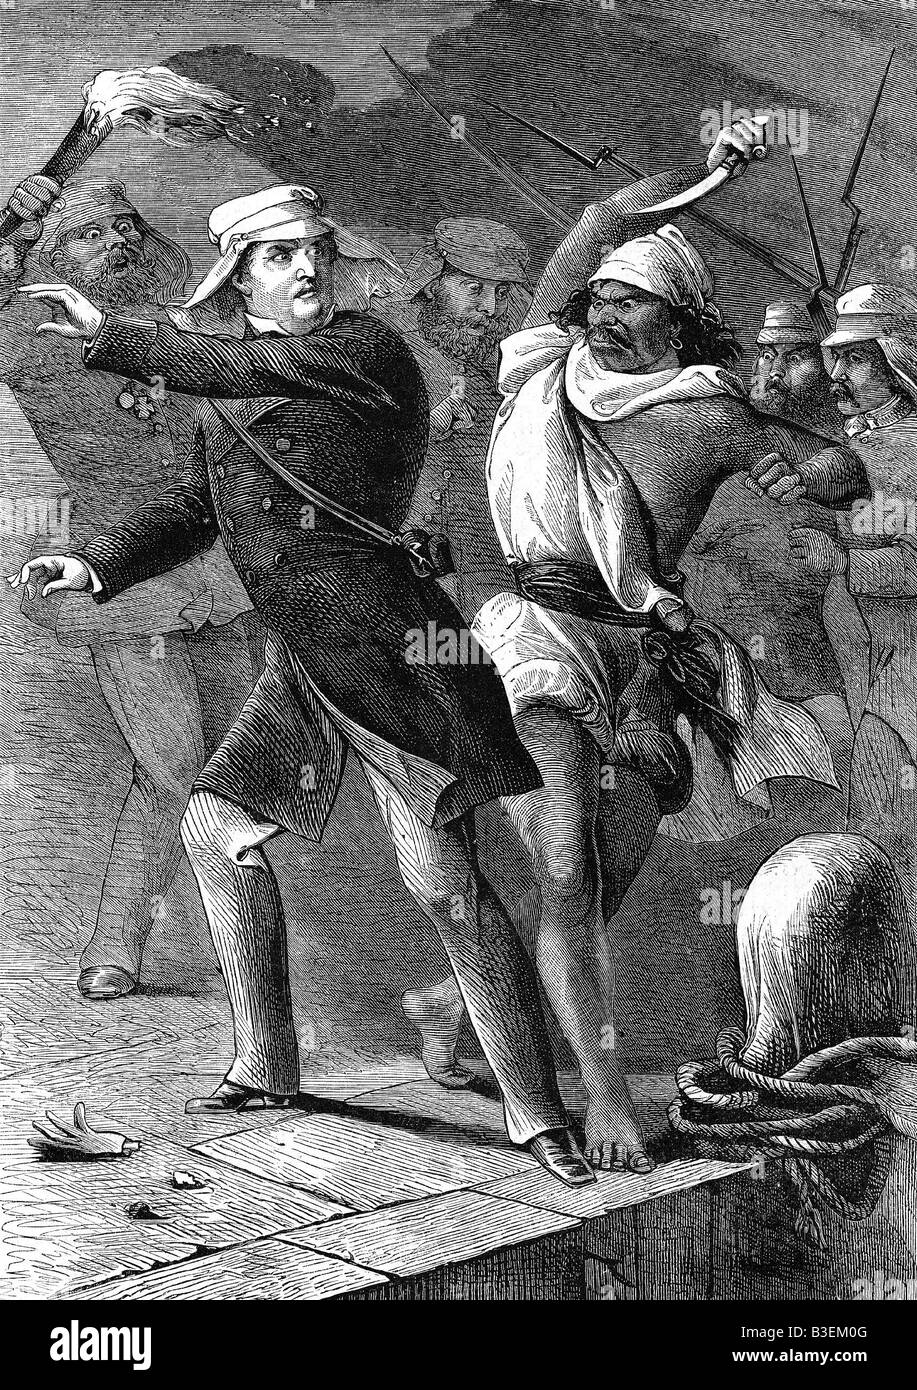 geography/travel, India, Indian Mutiny 1857 - 1858, killing of General Sir Hugh Wheeler, Kanpur, 25.6.1857, engraving, 19th century, rebellion, Sepoys, British East Indian Company, mutineers, siege, Cawnpore, historic, historical, people, Stock Photo